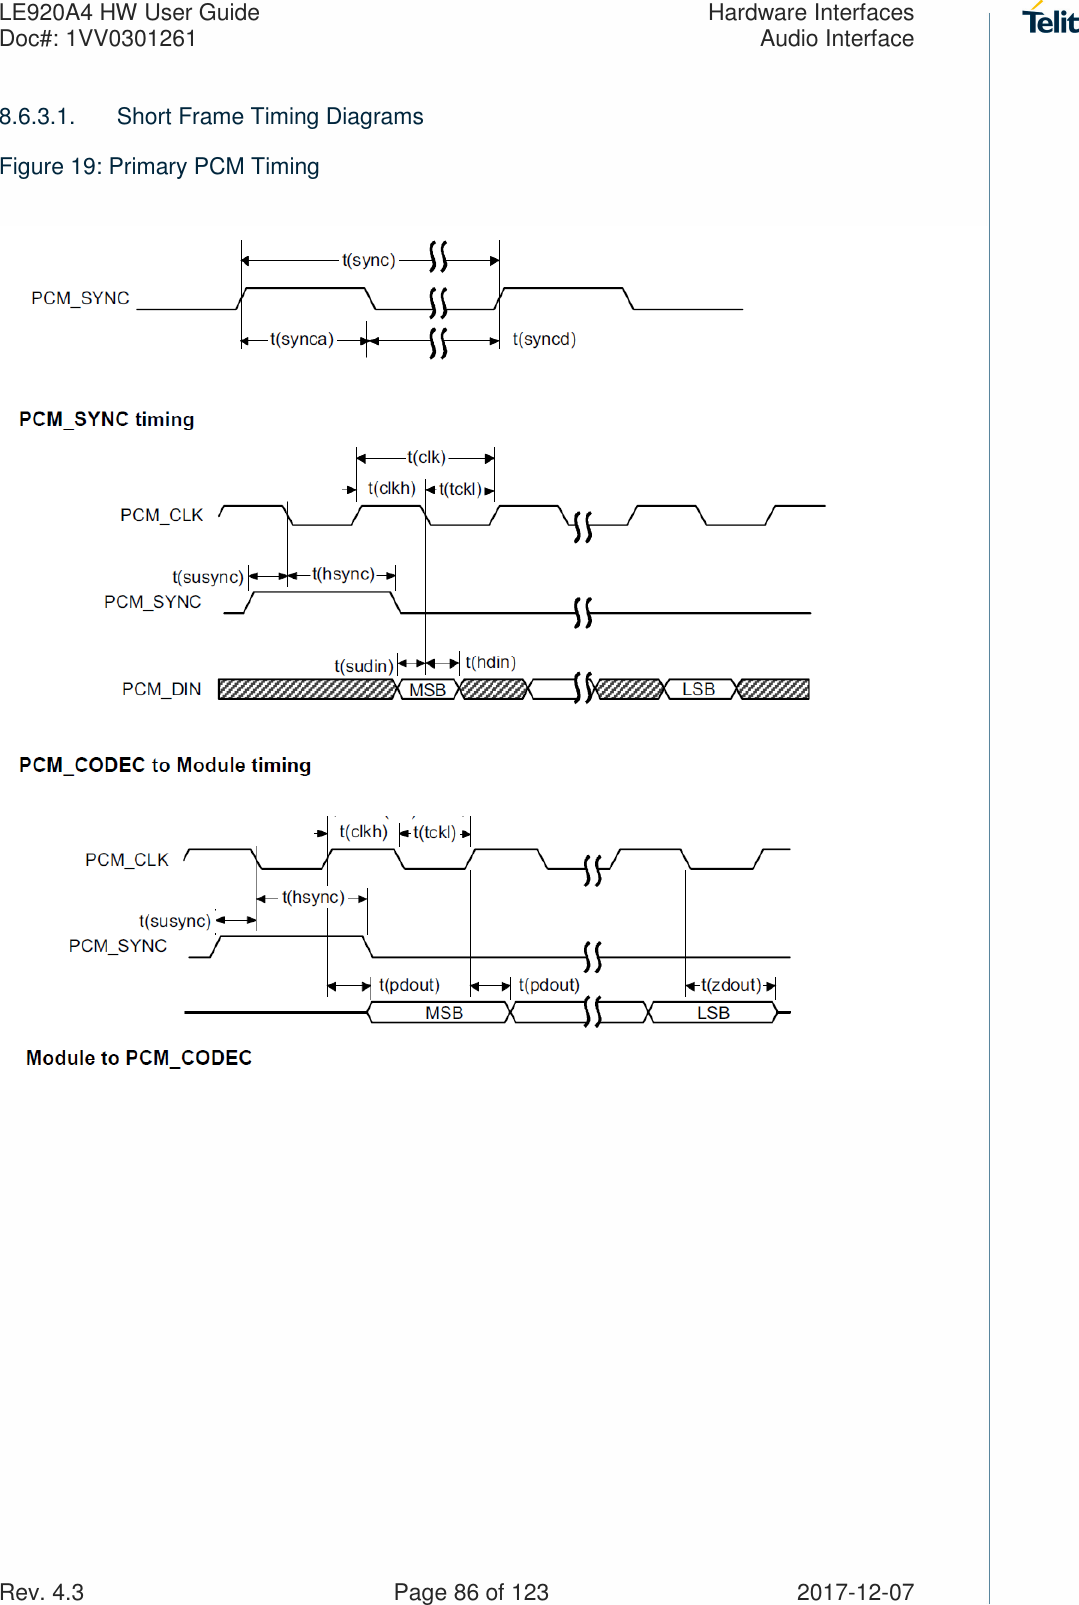 LE920A4 HW User Guide  Hardware Interfaces Doc#: 1VV0301261  Audio Interface Rev. 4.3    Page 86 of 123  2017-12-07 8.6.3.1.  Short Frame Timing Diagrams Figure 19: Primary PCM Timing     